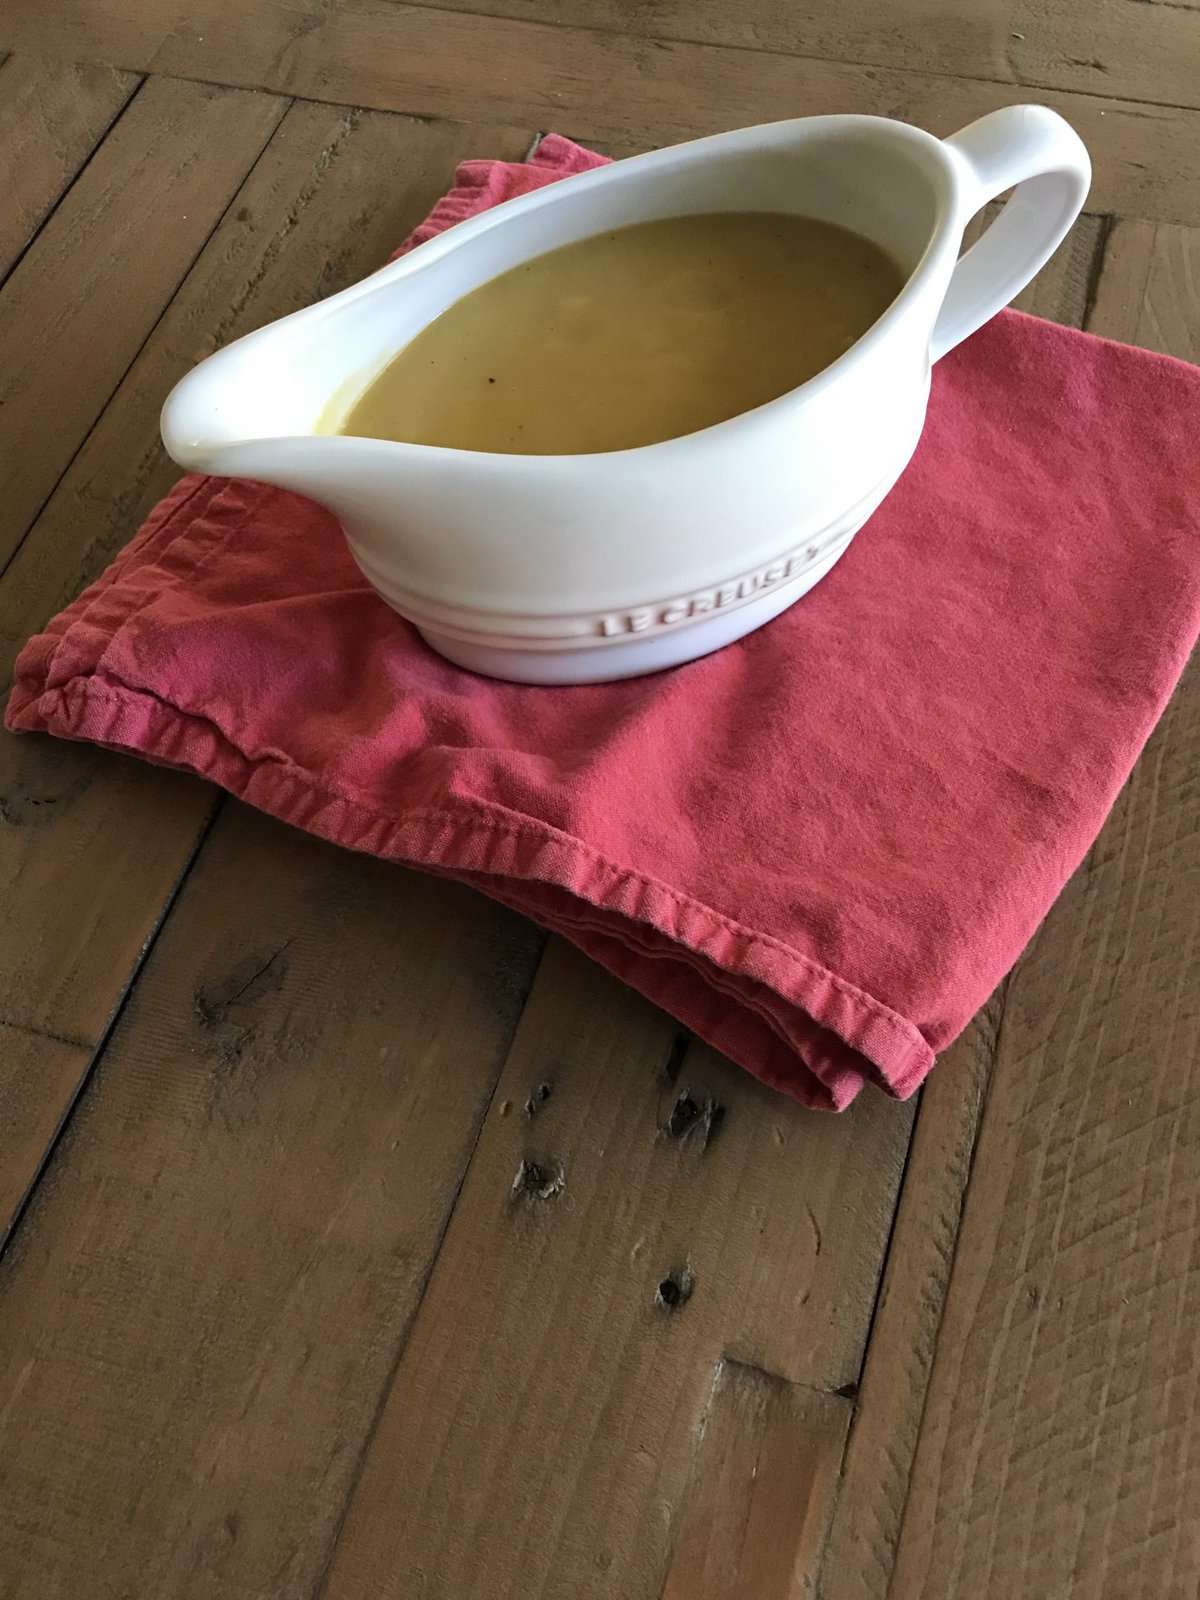 A pitcher of vegetarian gravy on a red napkin.